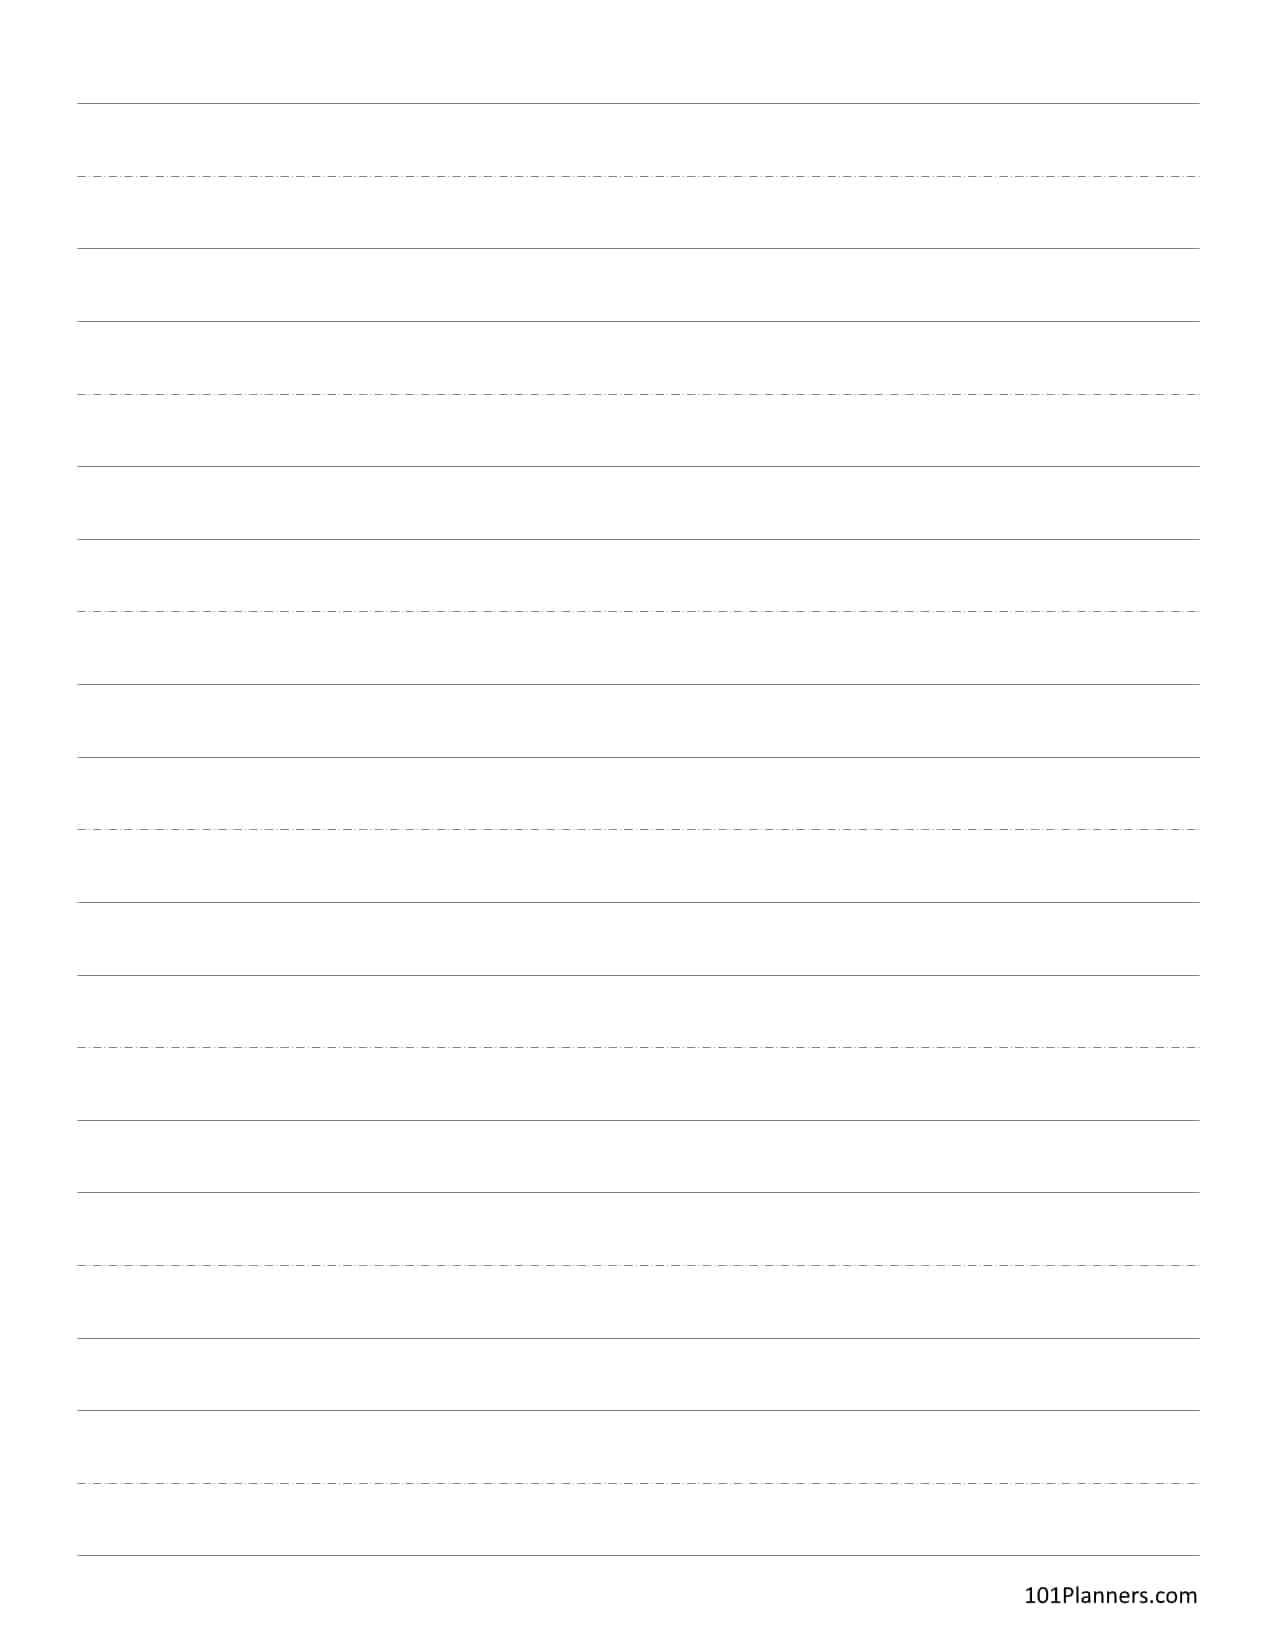 free printable lined paper many templates are available